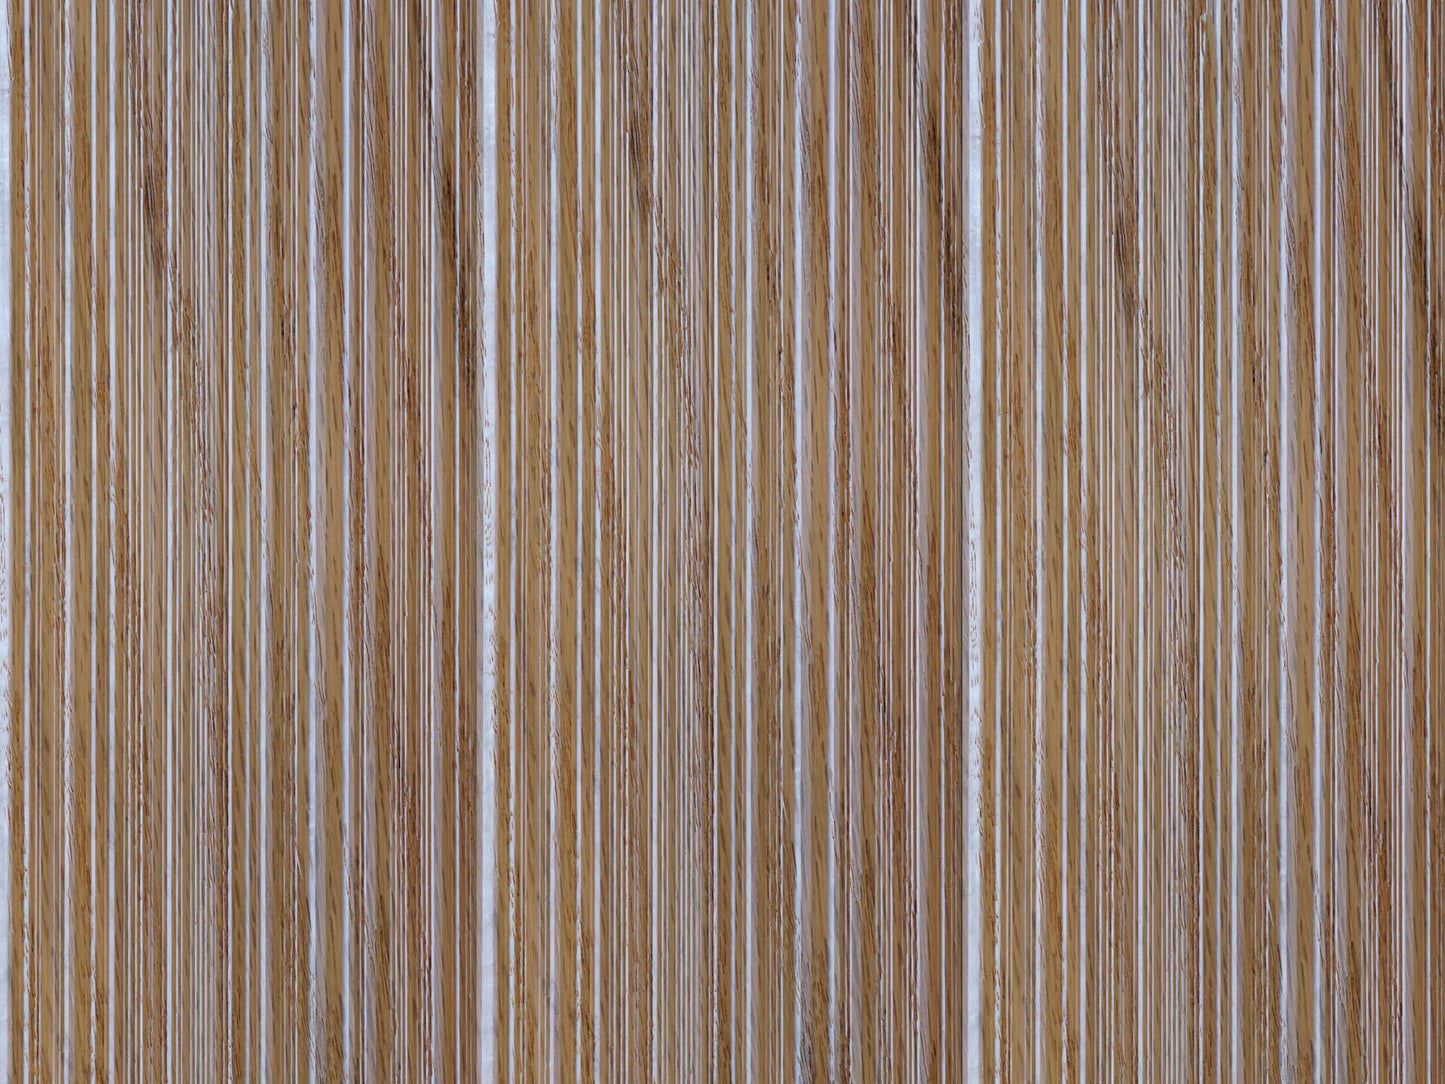 Side by side of Weldtex tongue & groove red oak hardwood plank consisting of a combed, striated, brushed wood appearance common in mid-century modern homes and design